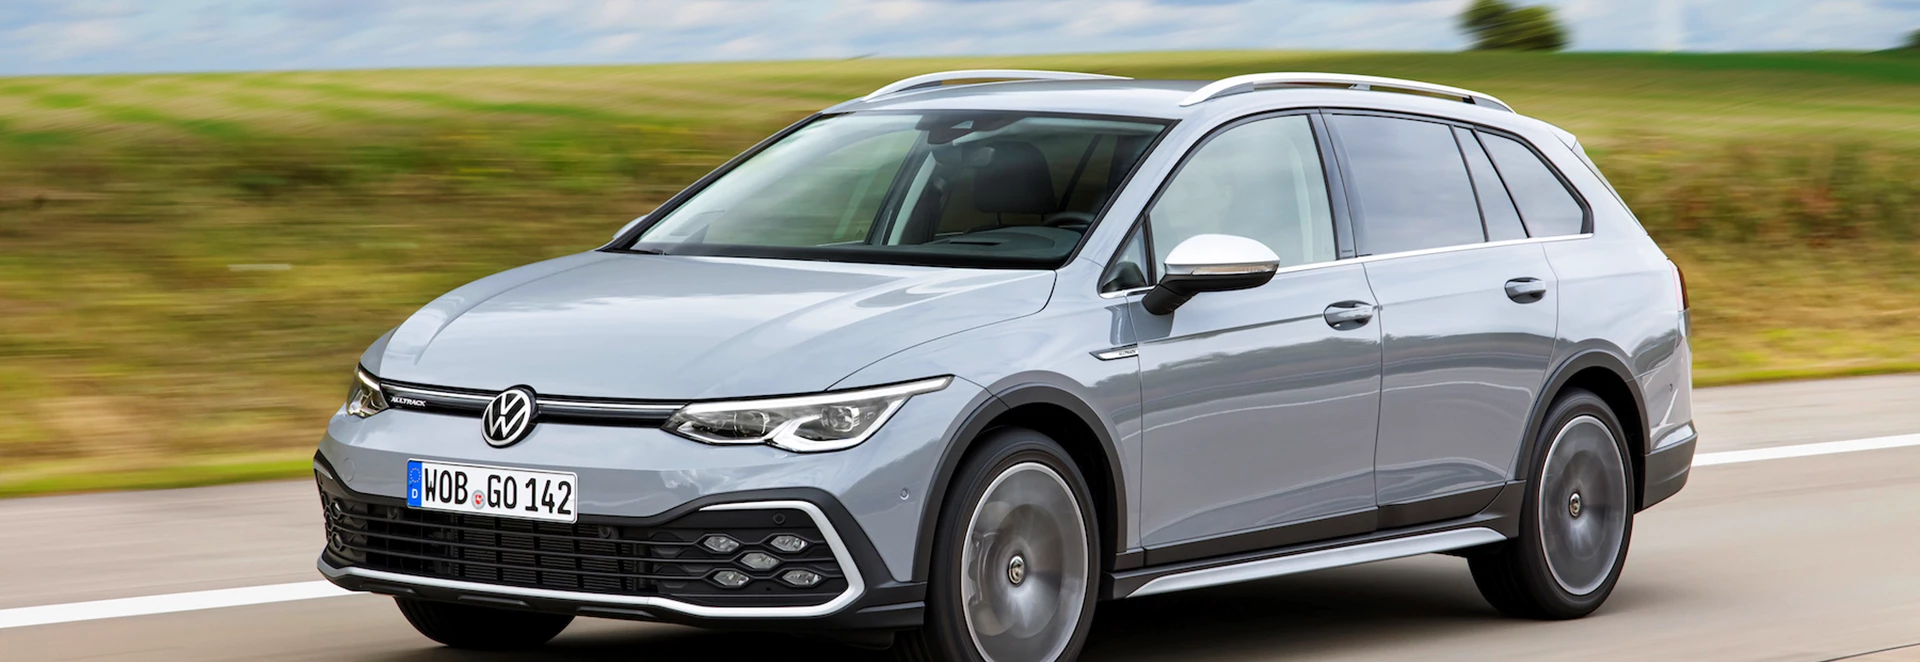 New Volkswagen Golf Estate prices and specs announced 